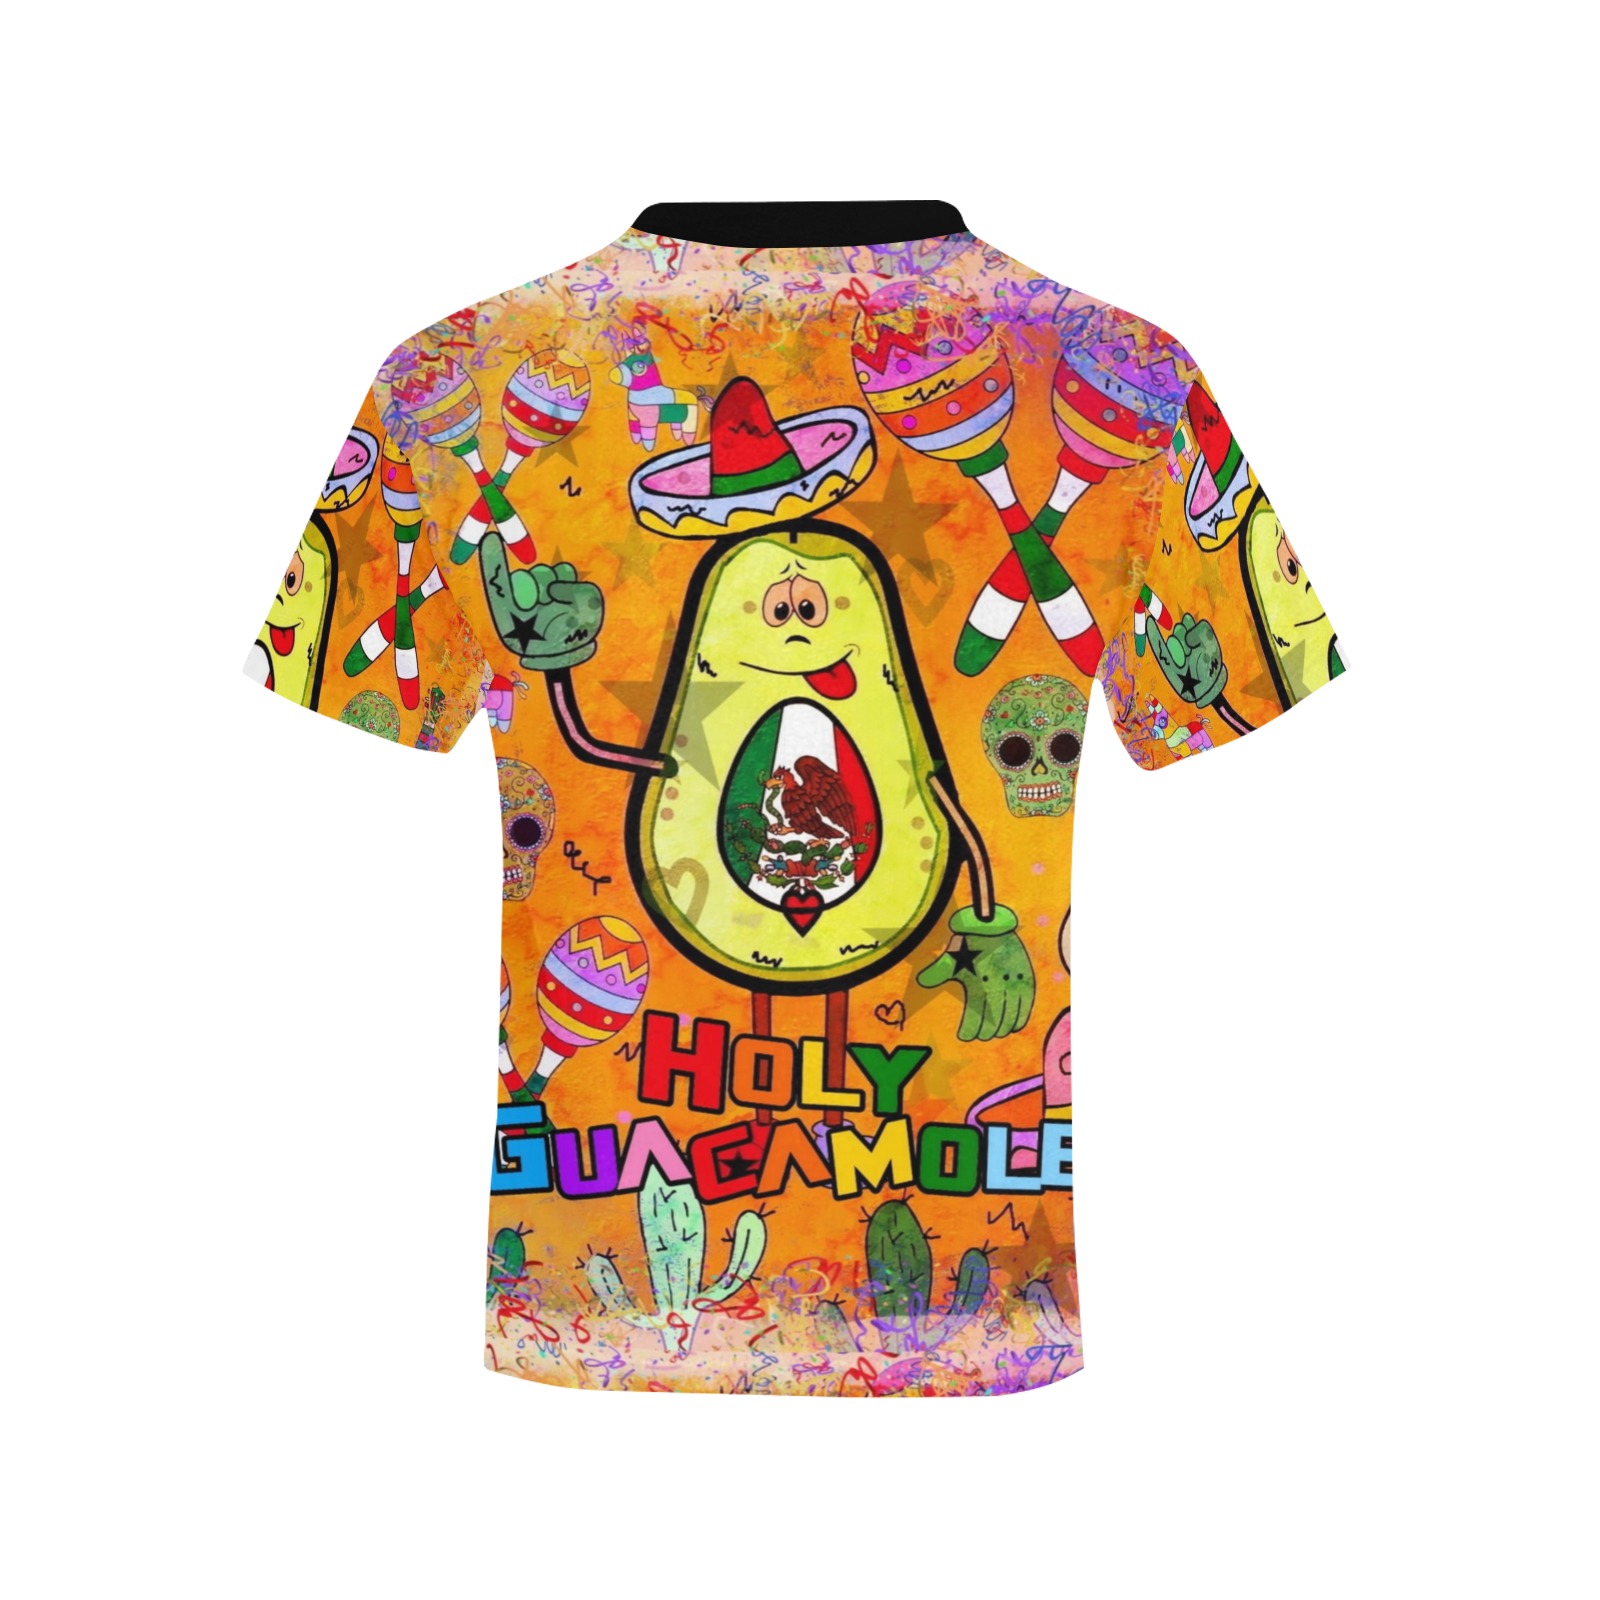 Holy Guacamole by Nico Bielow Kids' All Over Print T-shirt (Model T65)